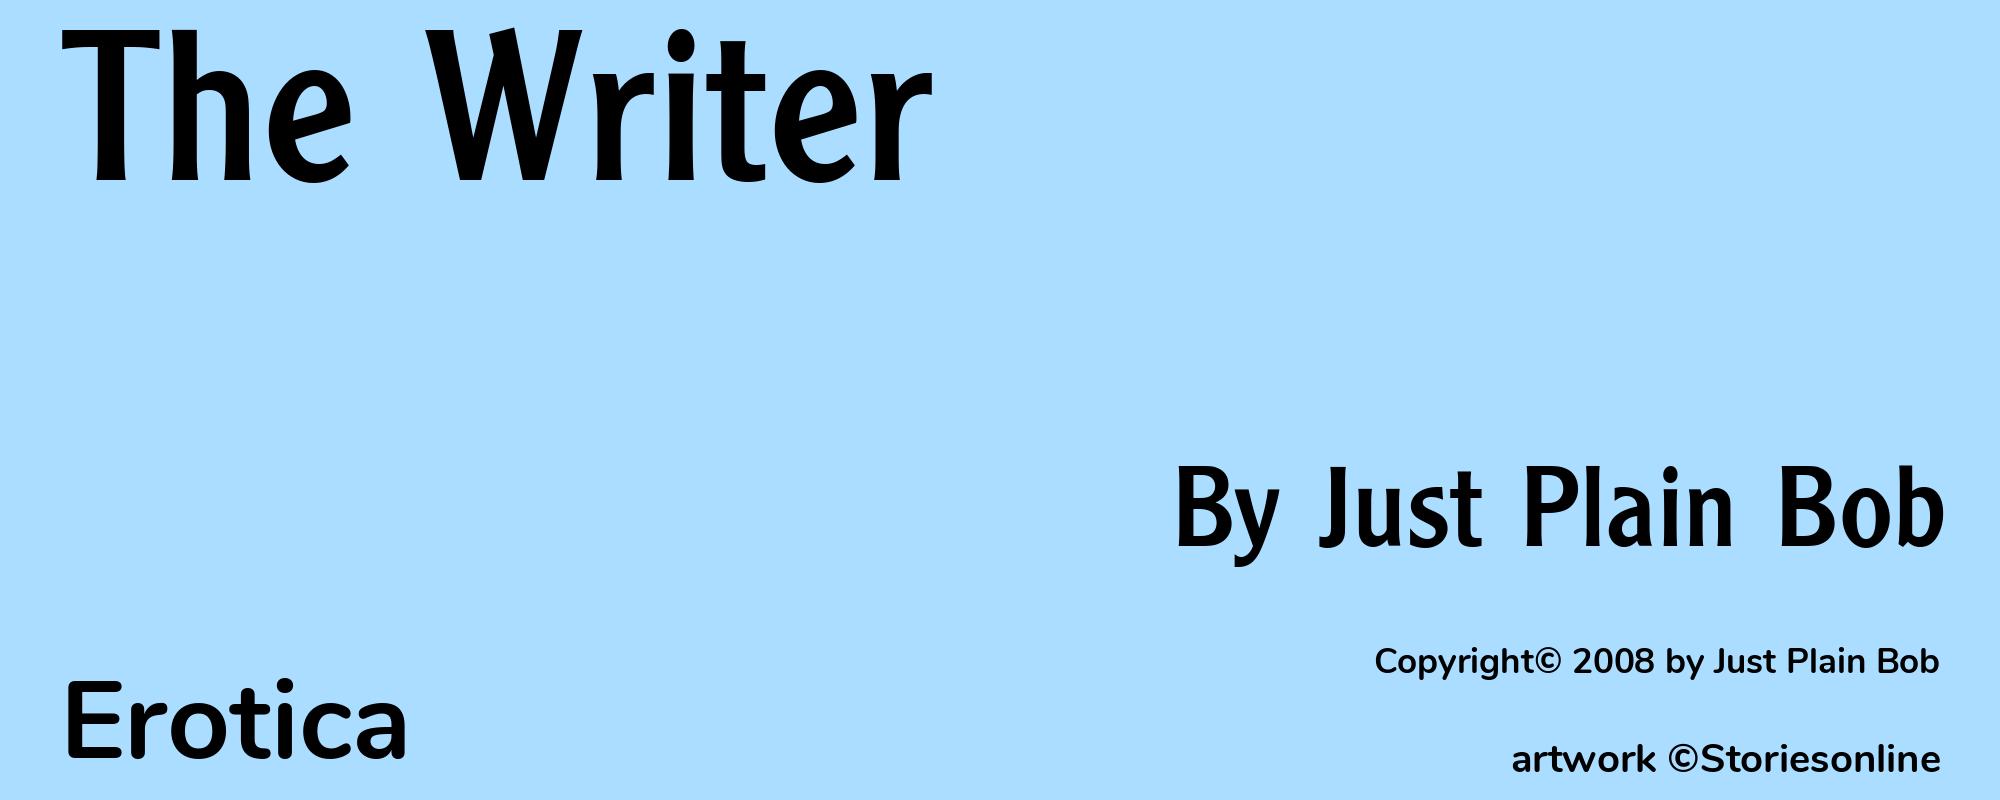 The Writer - Cover